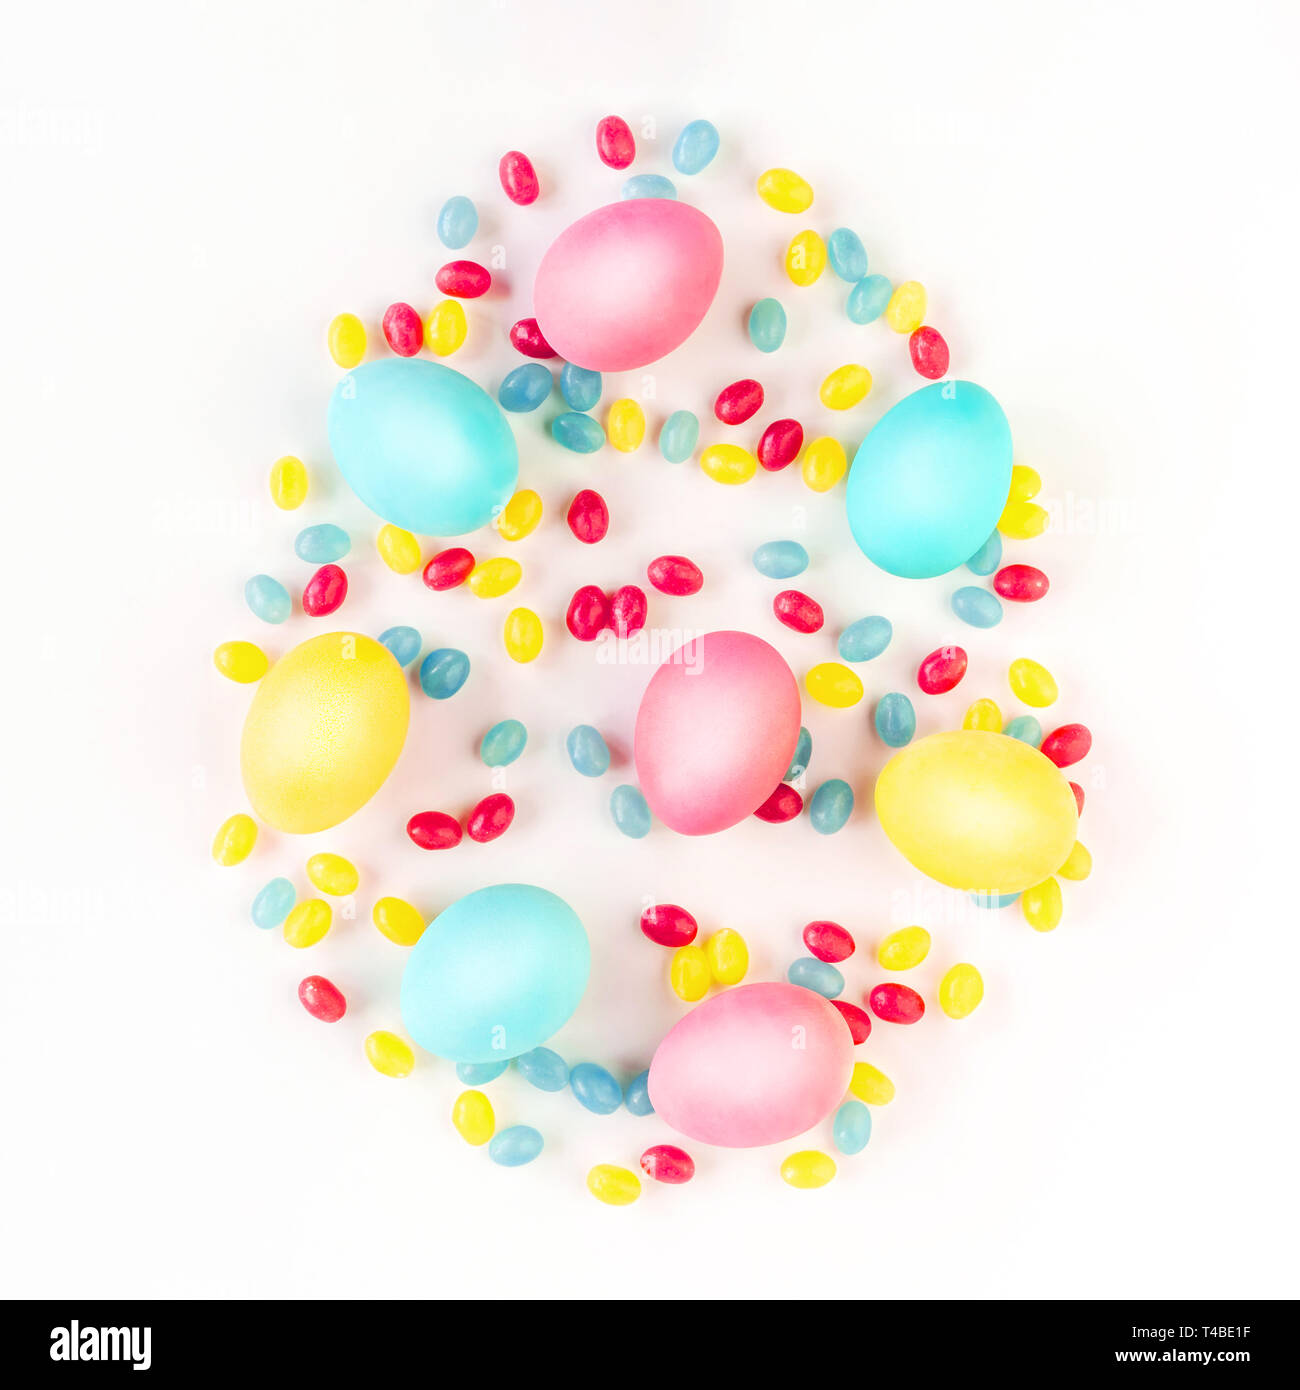 Easter egg concept. Colorful eggs and candies on isolated white background. Flat lay. Stock Photo